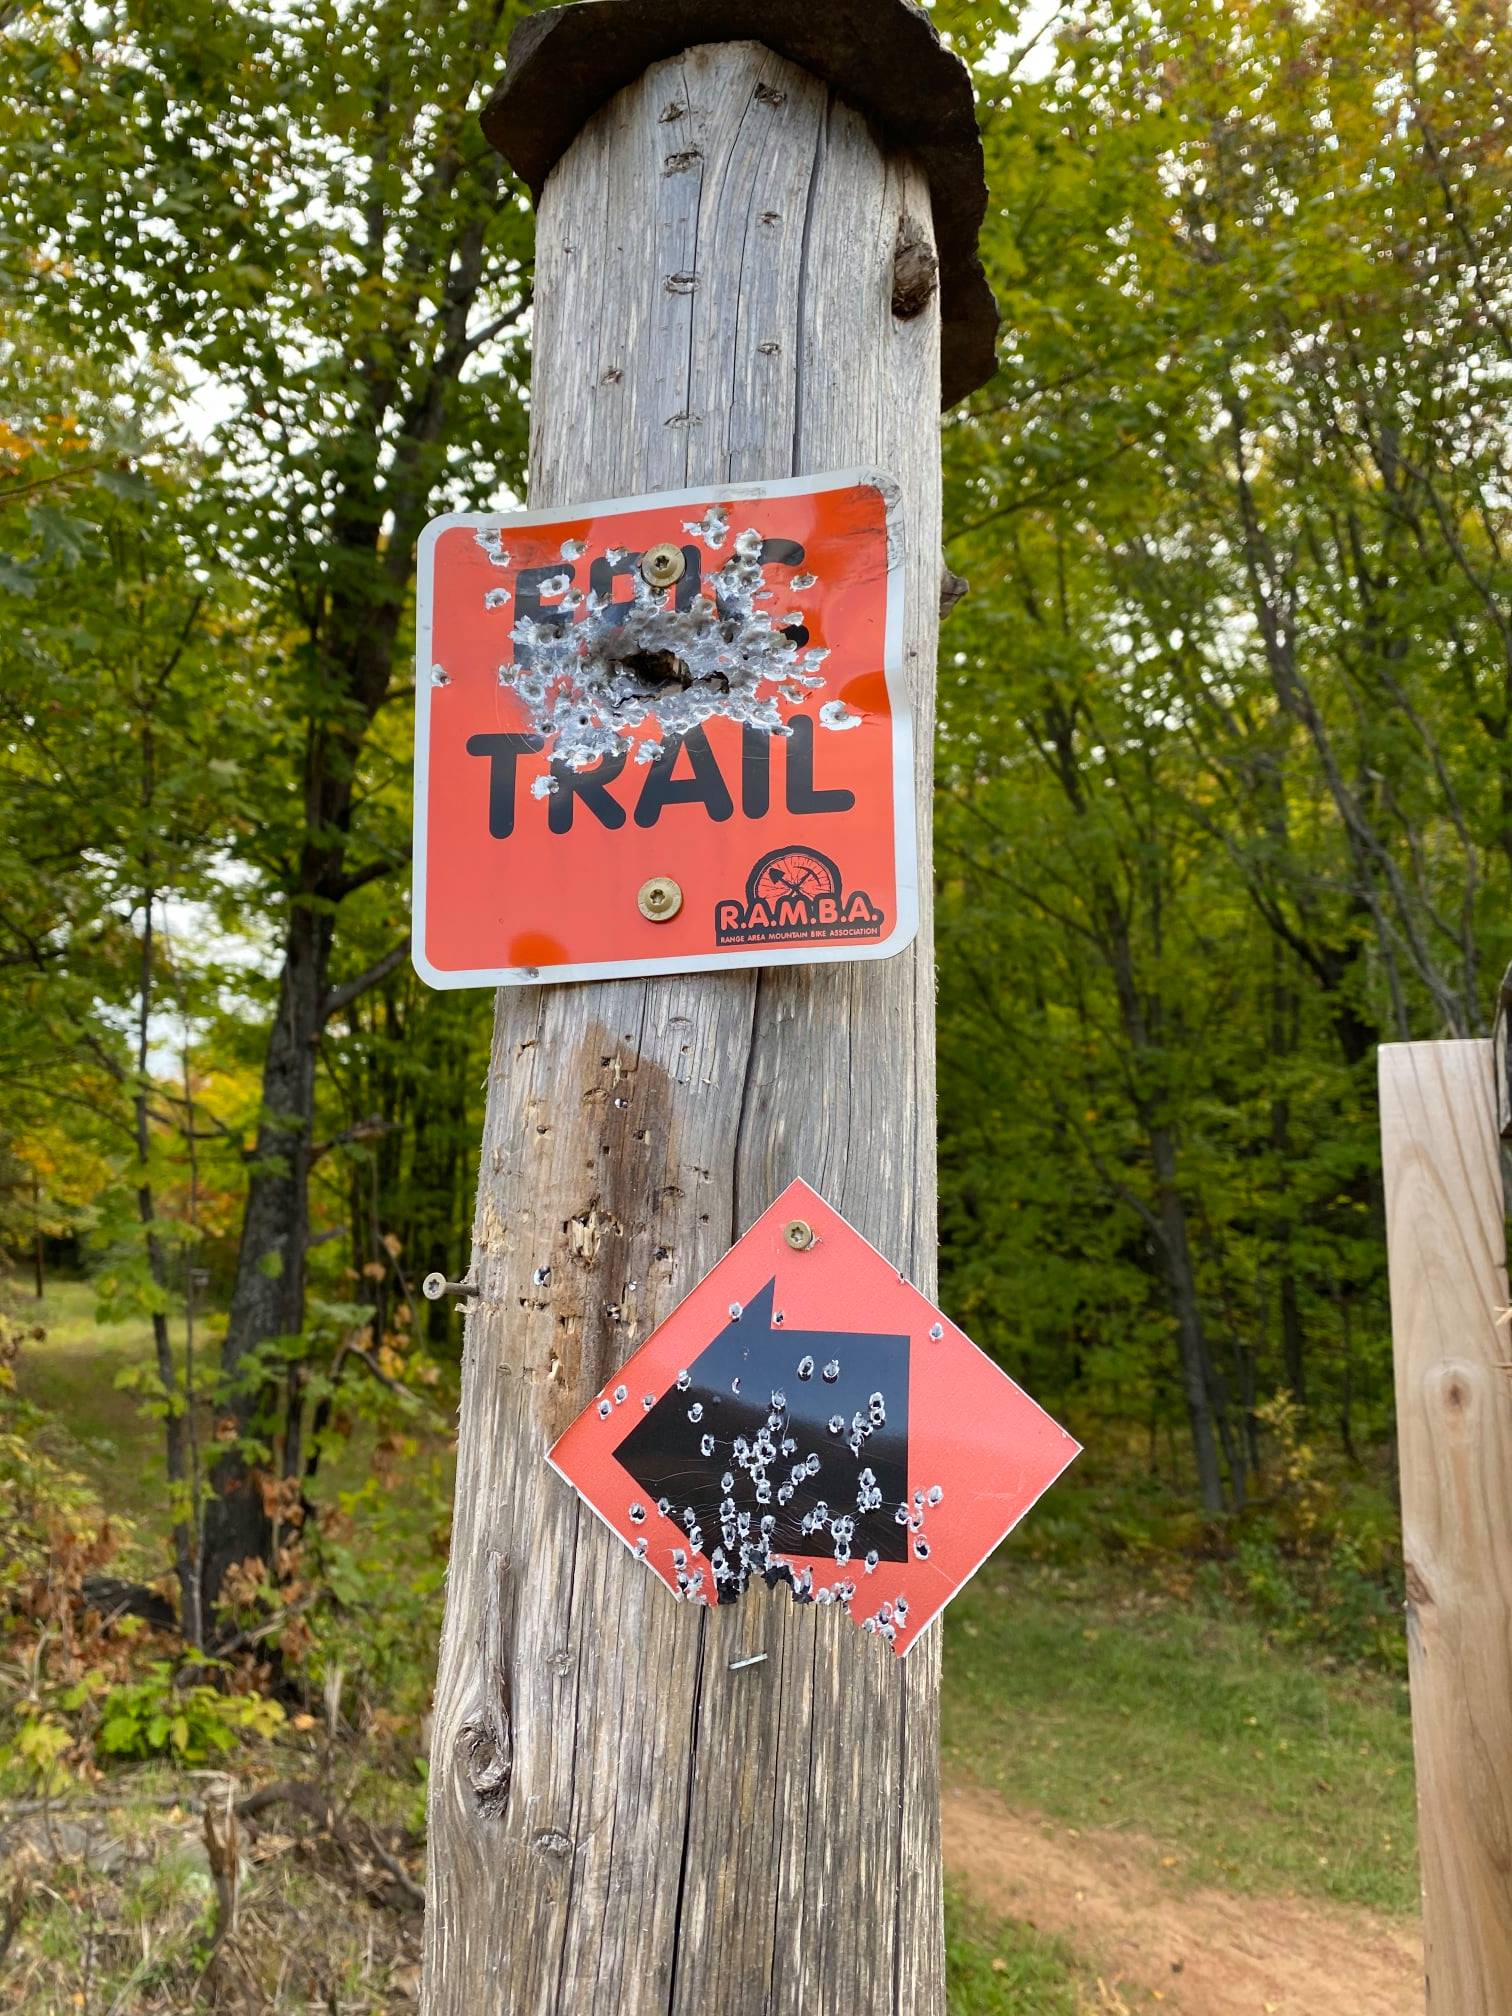 Sign damage on the Norman Juhola trail system